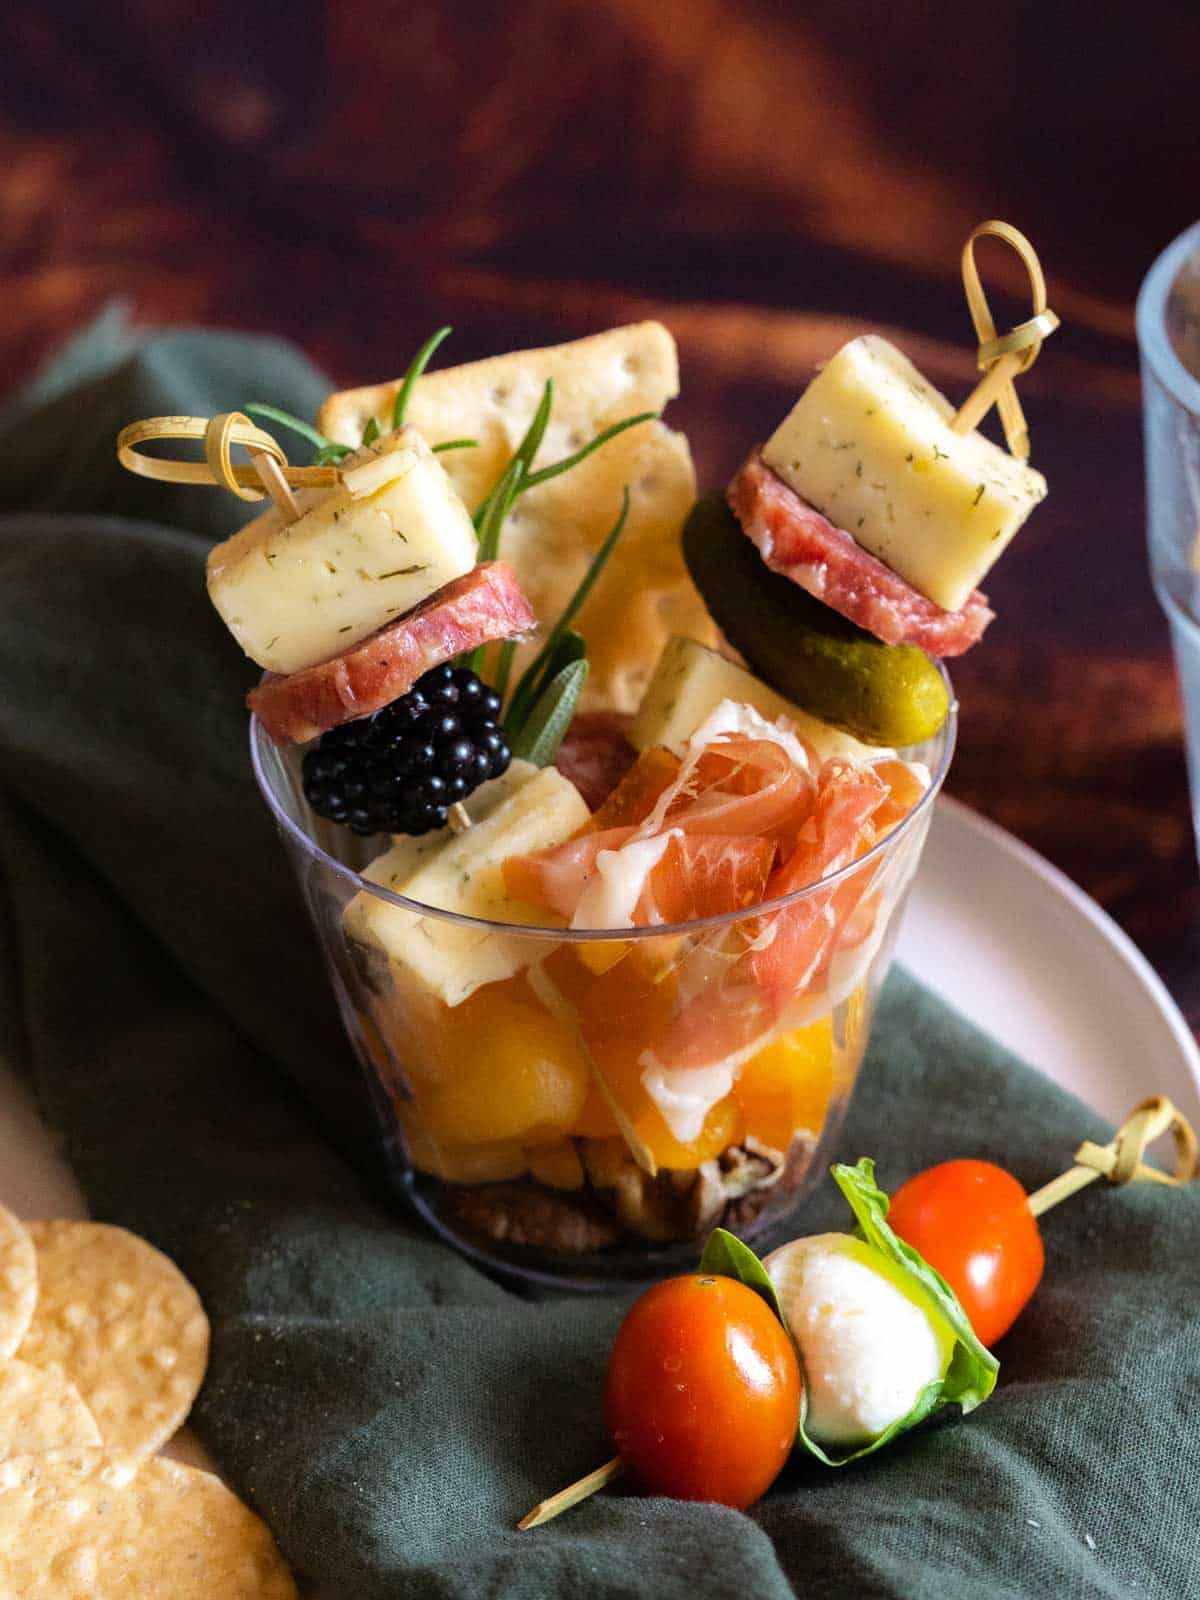 Charcuterie and cheese skewers in a cup.